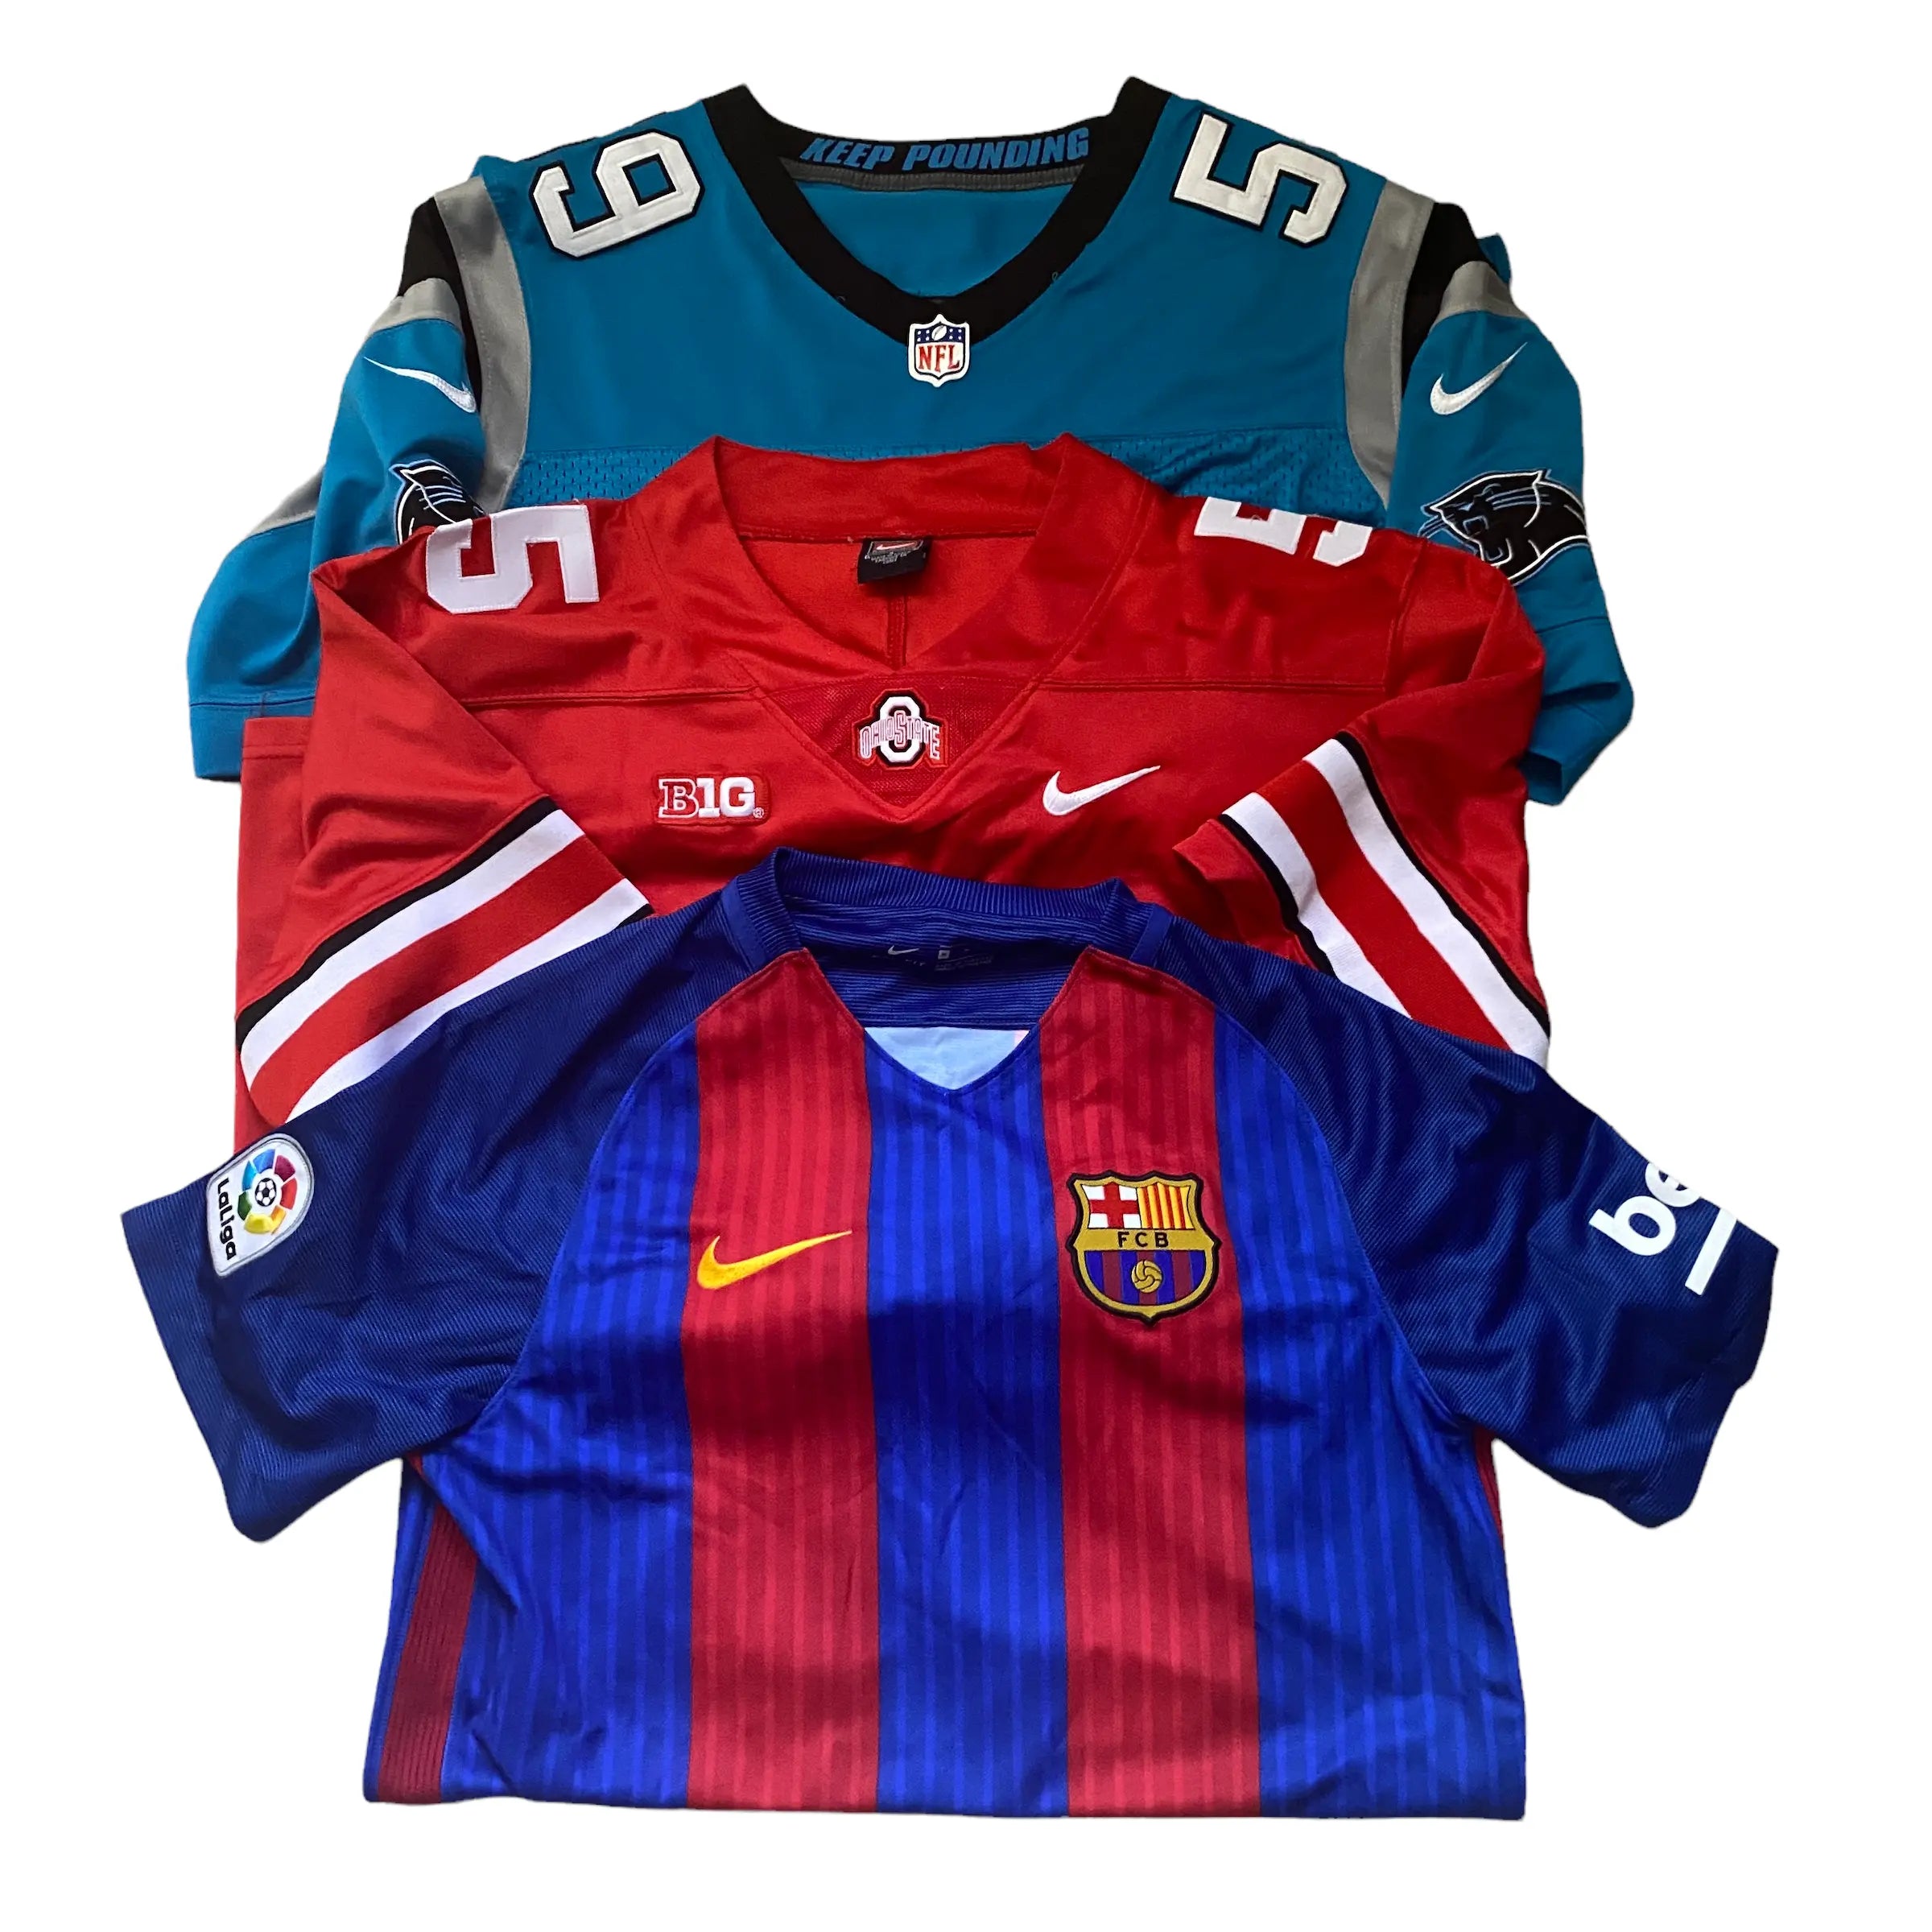 Wholesale Pro Sport Jersey (SOLD OUT)